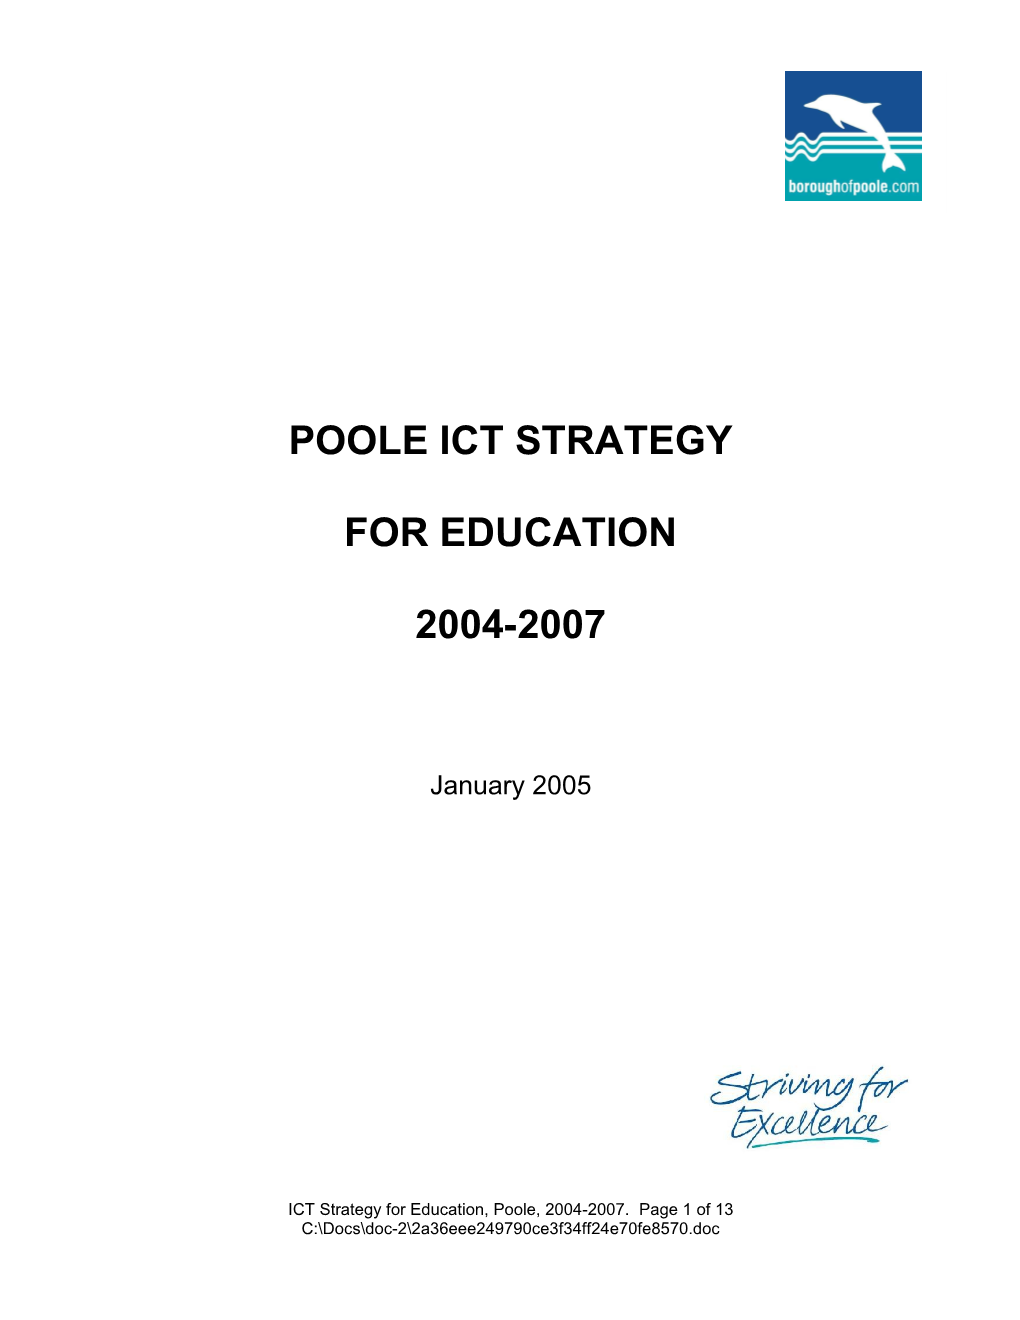 Poole Ict Strategy for Education - Appendix